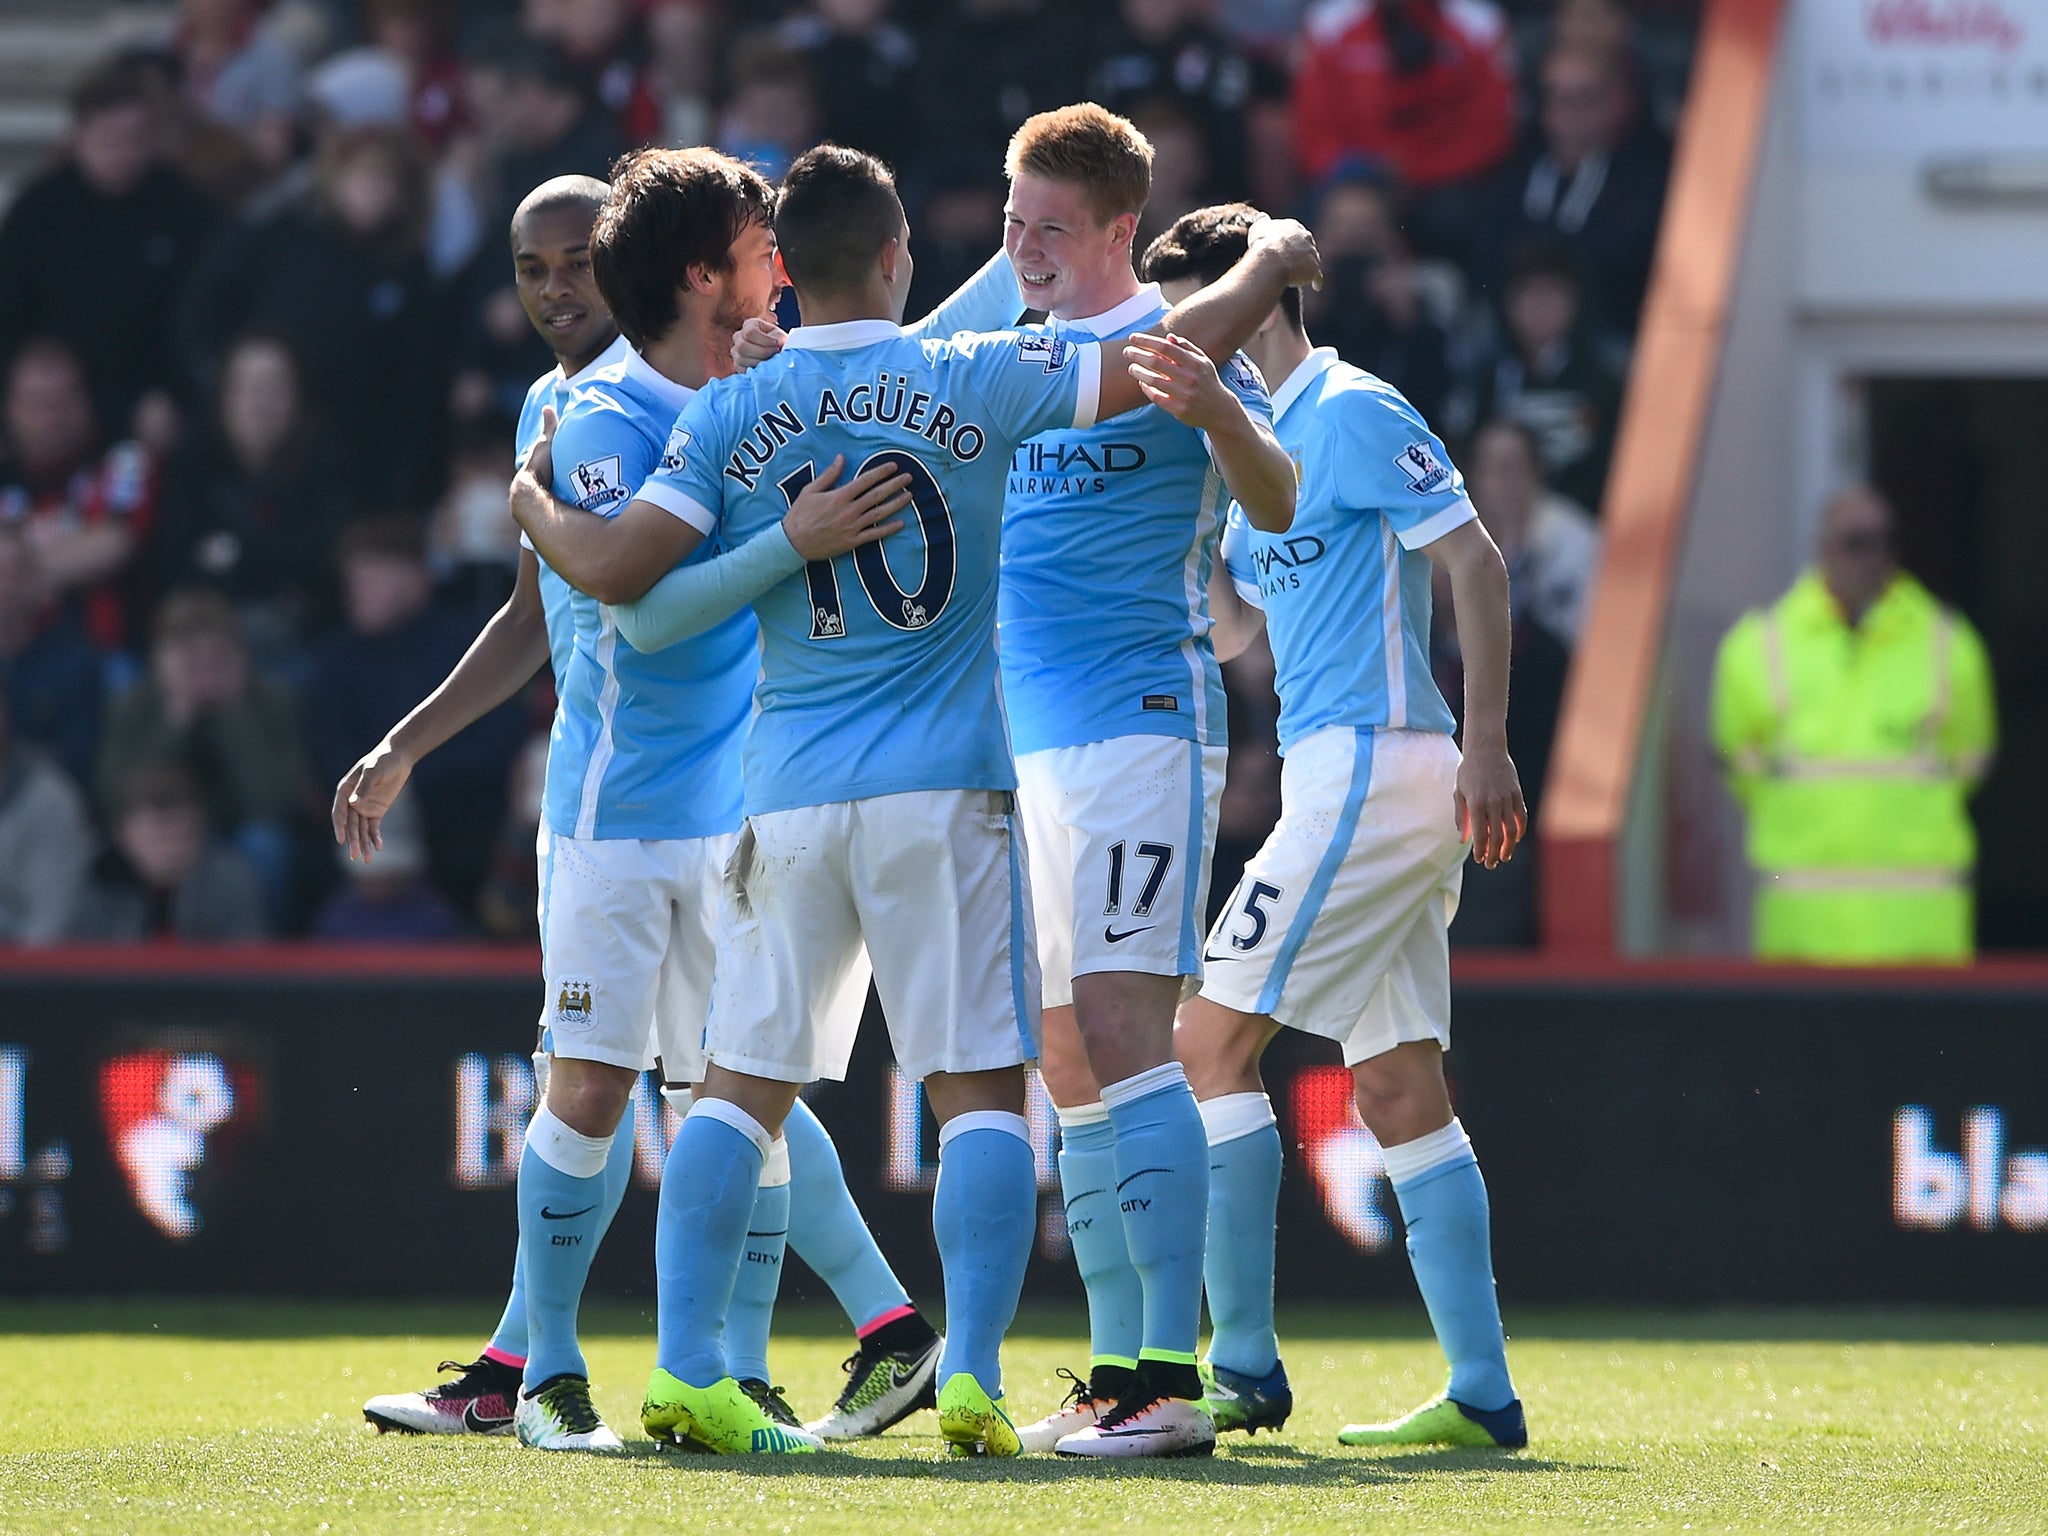 Kevin de Bruyne is congratulated by his team-mates upon scoring